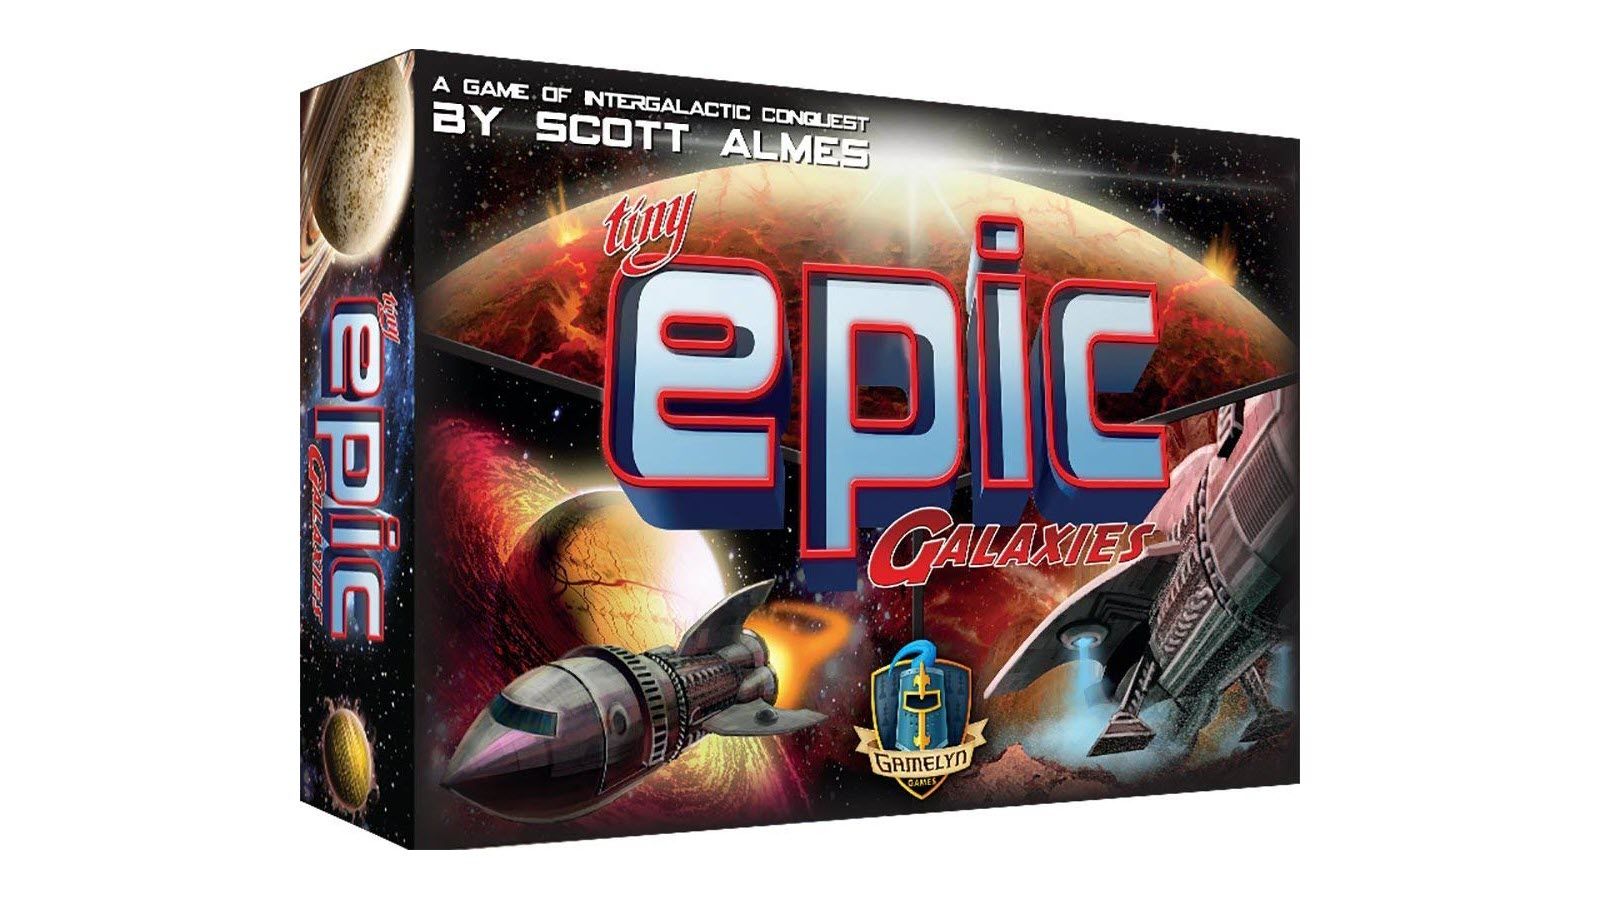 The Tiny Epic Galaxies board game box featuring spaceships and planets.